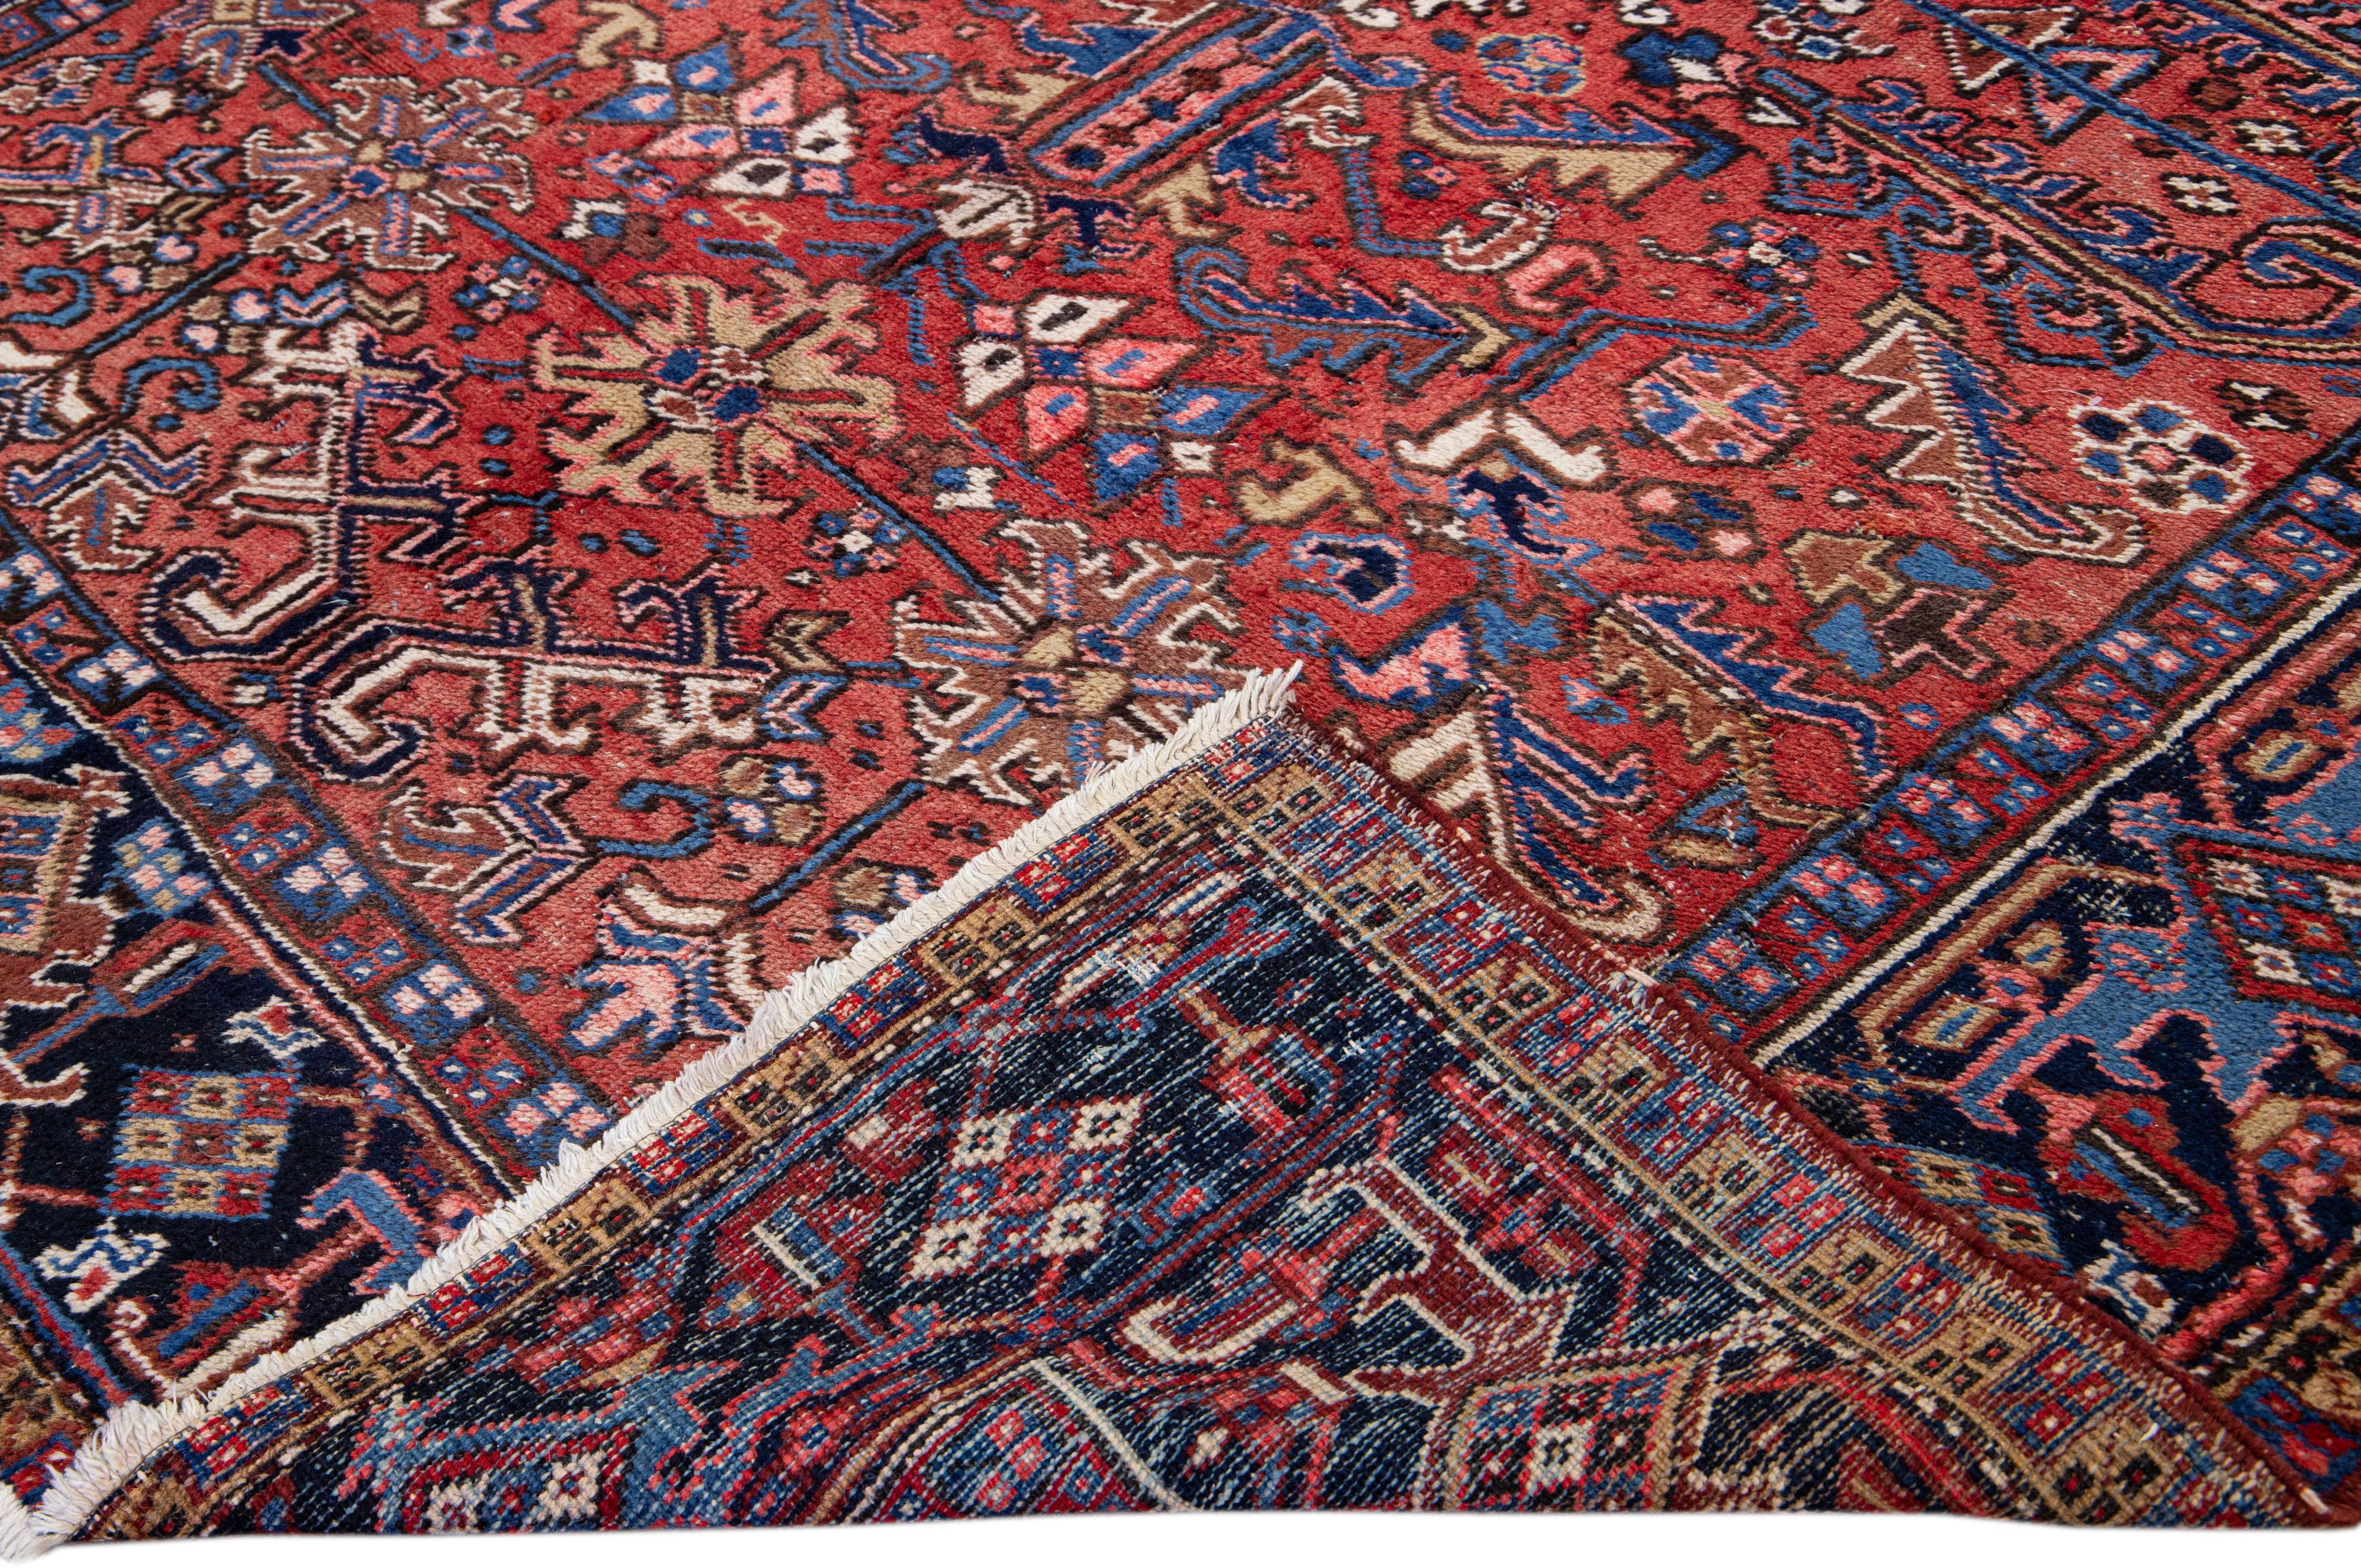 Beautiful antique Heriz Serapi hand-knotted wool rug with a red field. This Heriz rug has a navy-blue designed frame and multi-color accents in a gorgeous all-over Medallion floral design.

This rug measures: 7'7